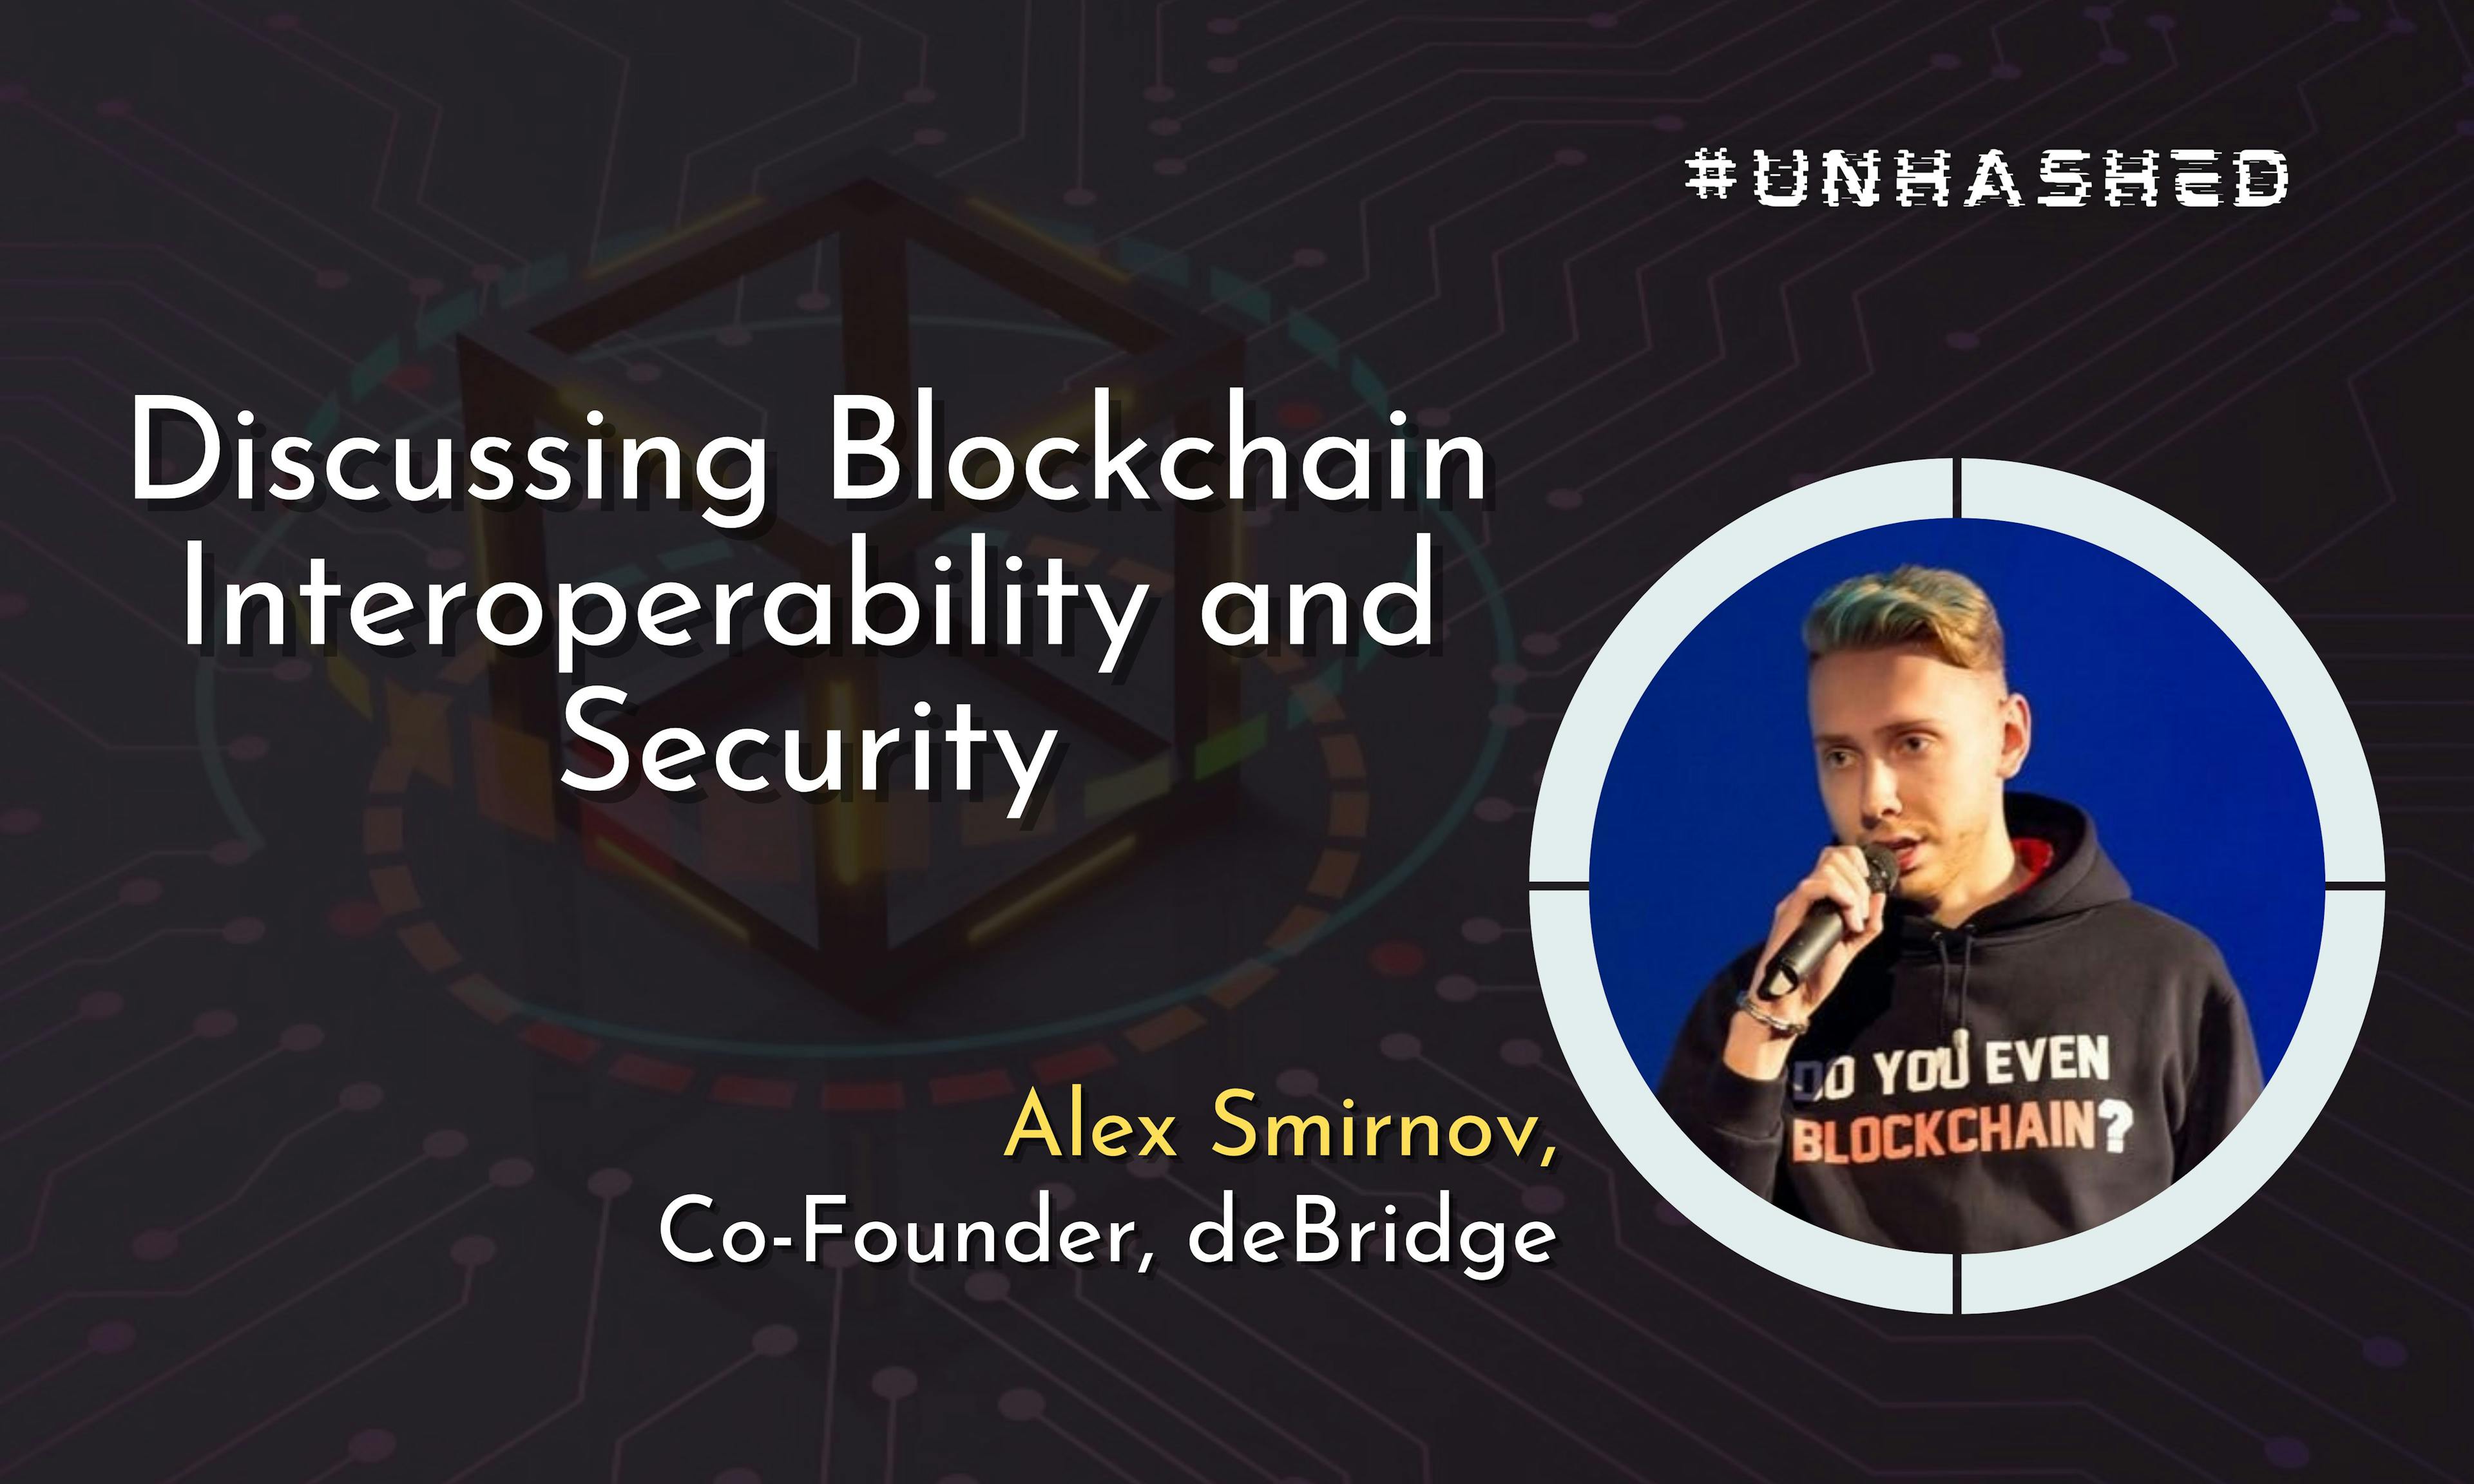 featured image - Blockchain Interoperability is Complex and Needs Better Focus on Security: Unhashed #17